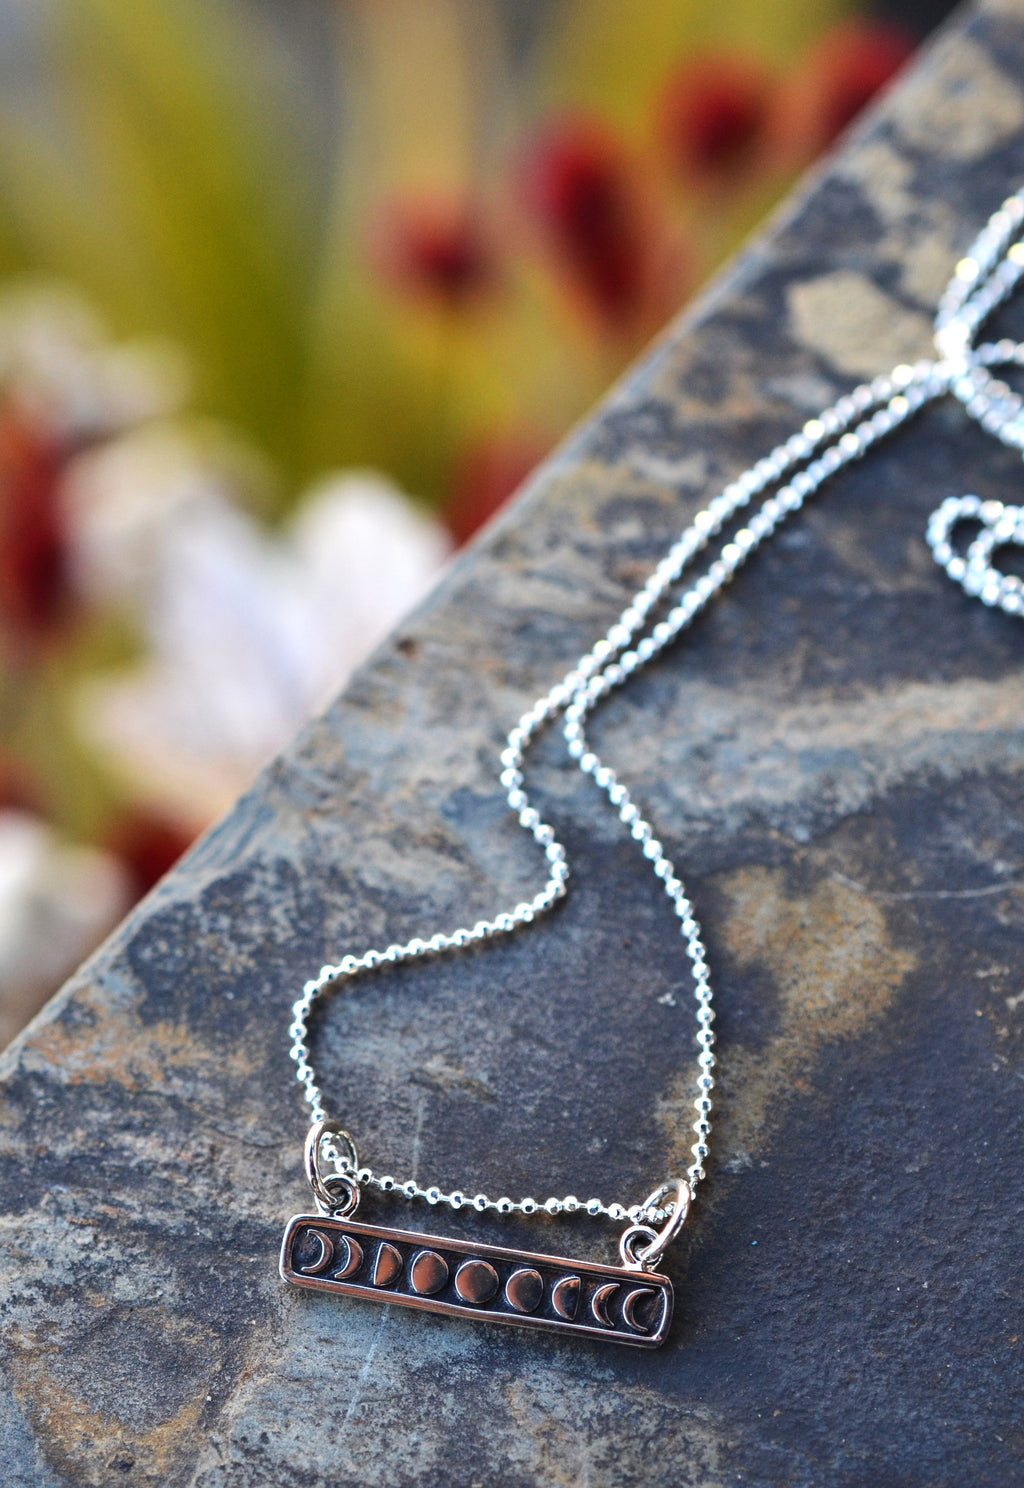 BLOWOUT Sale! Moon Phase Necklace - Horizontal - Sterling Silver - 18" Delicate Beaded Chain Included